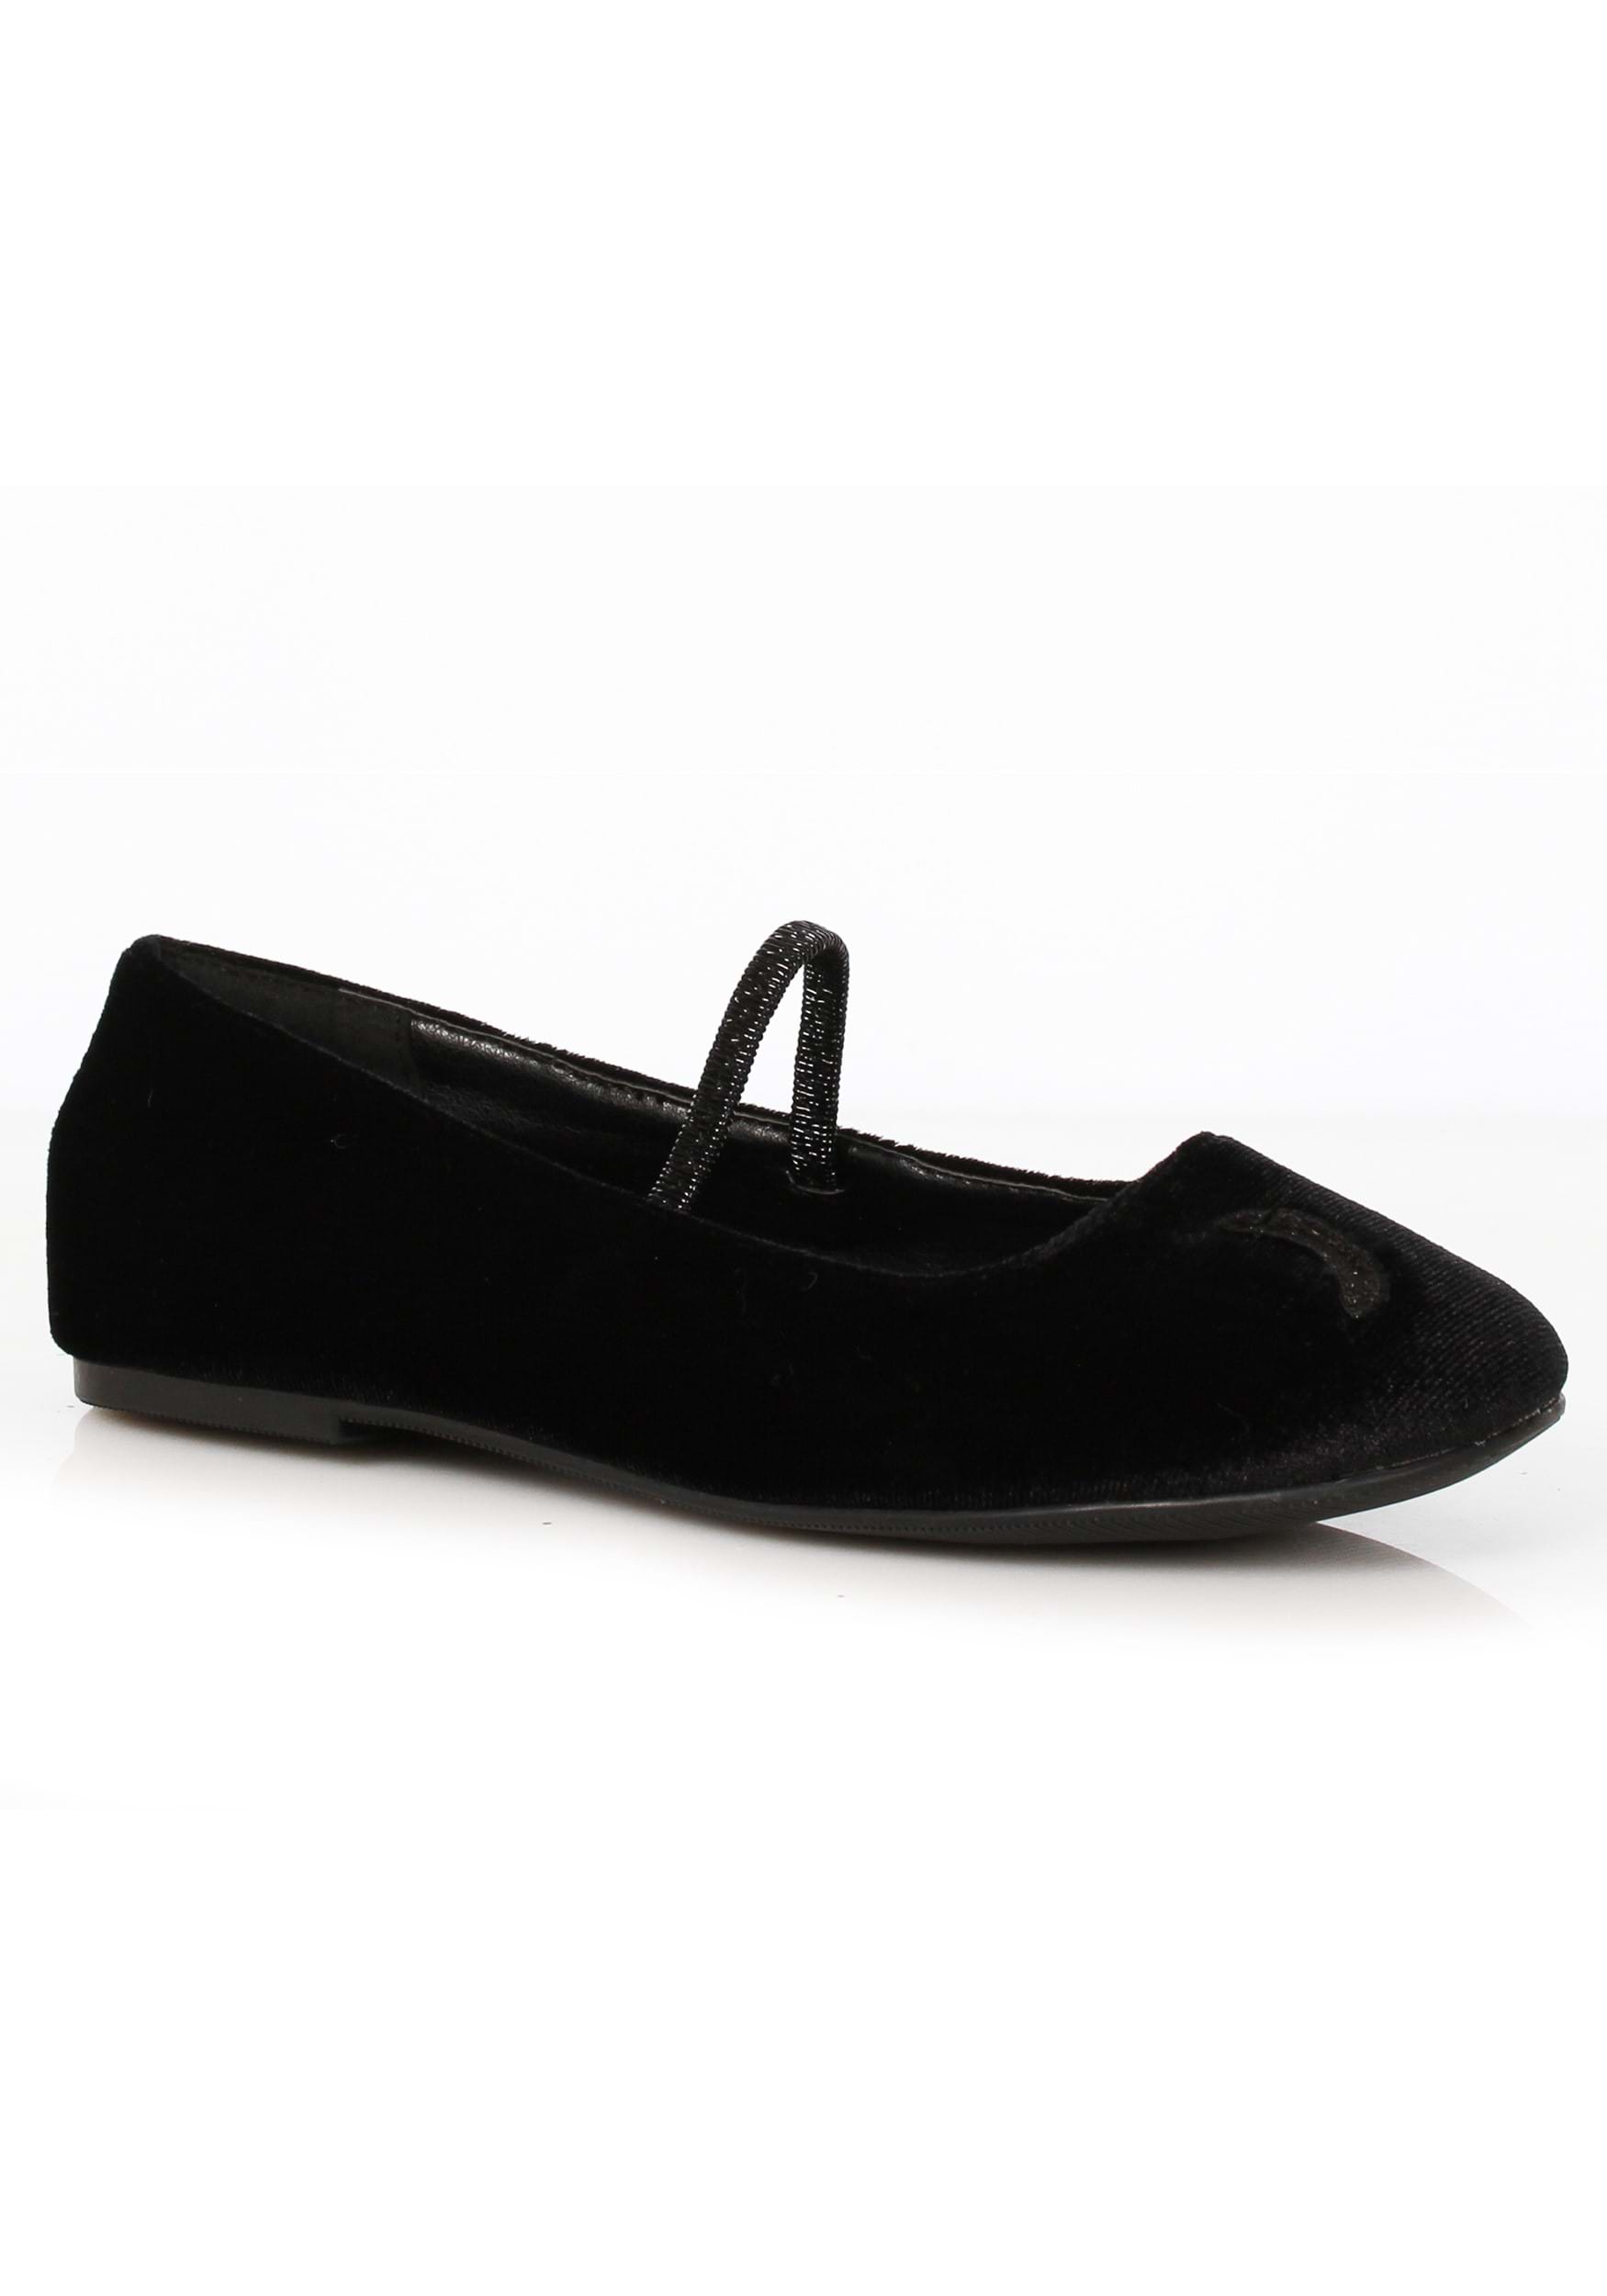 Black Crescent Girls Witch Ballet Flat Shoes